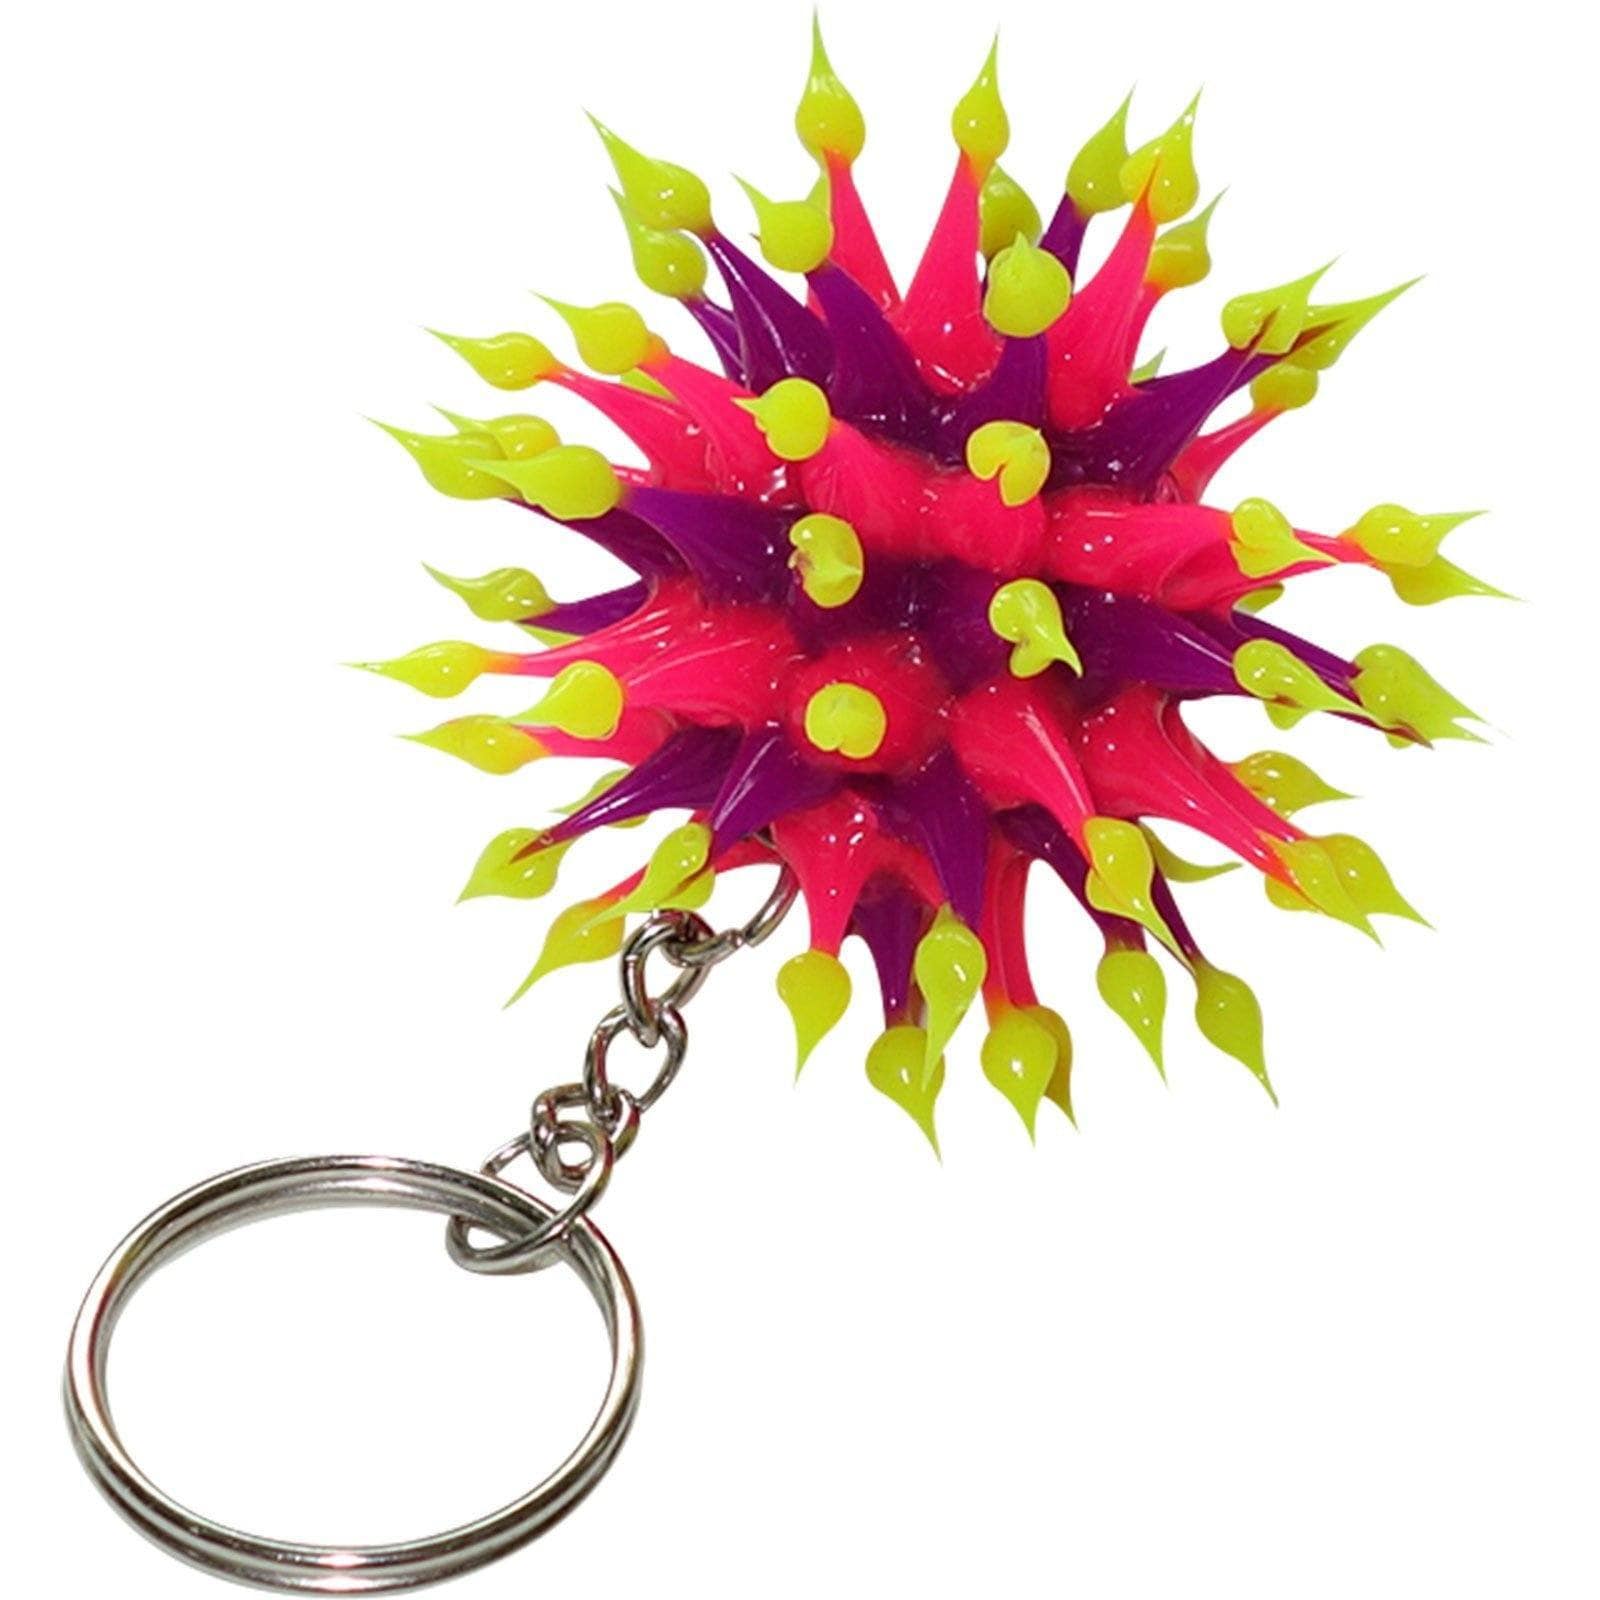 2 X Bright Colourful Spiky Ball Keyrings Rubber Silicone Fluorescent Keychains